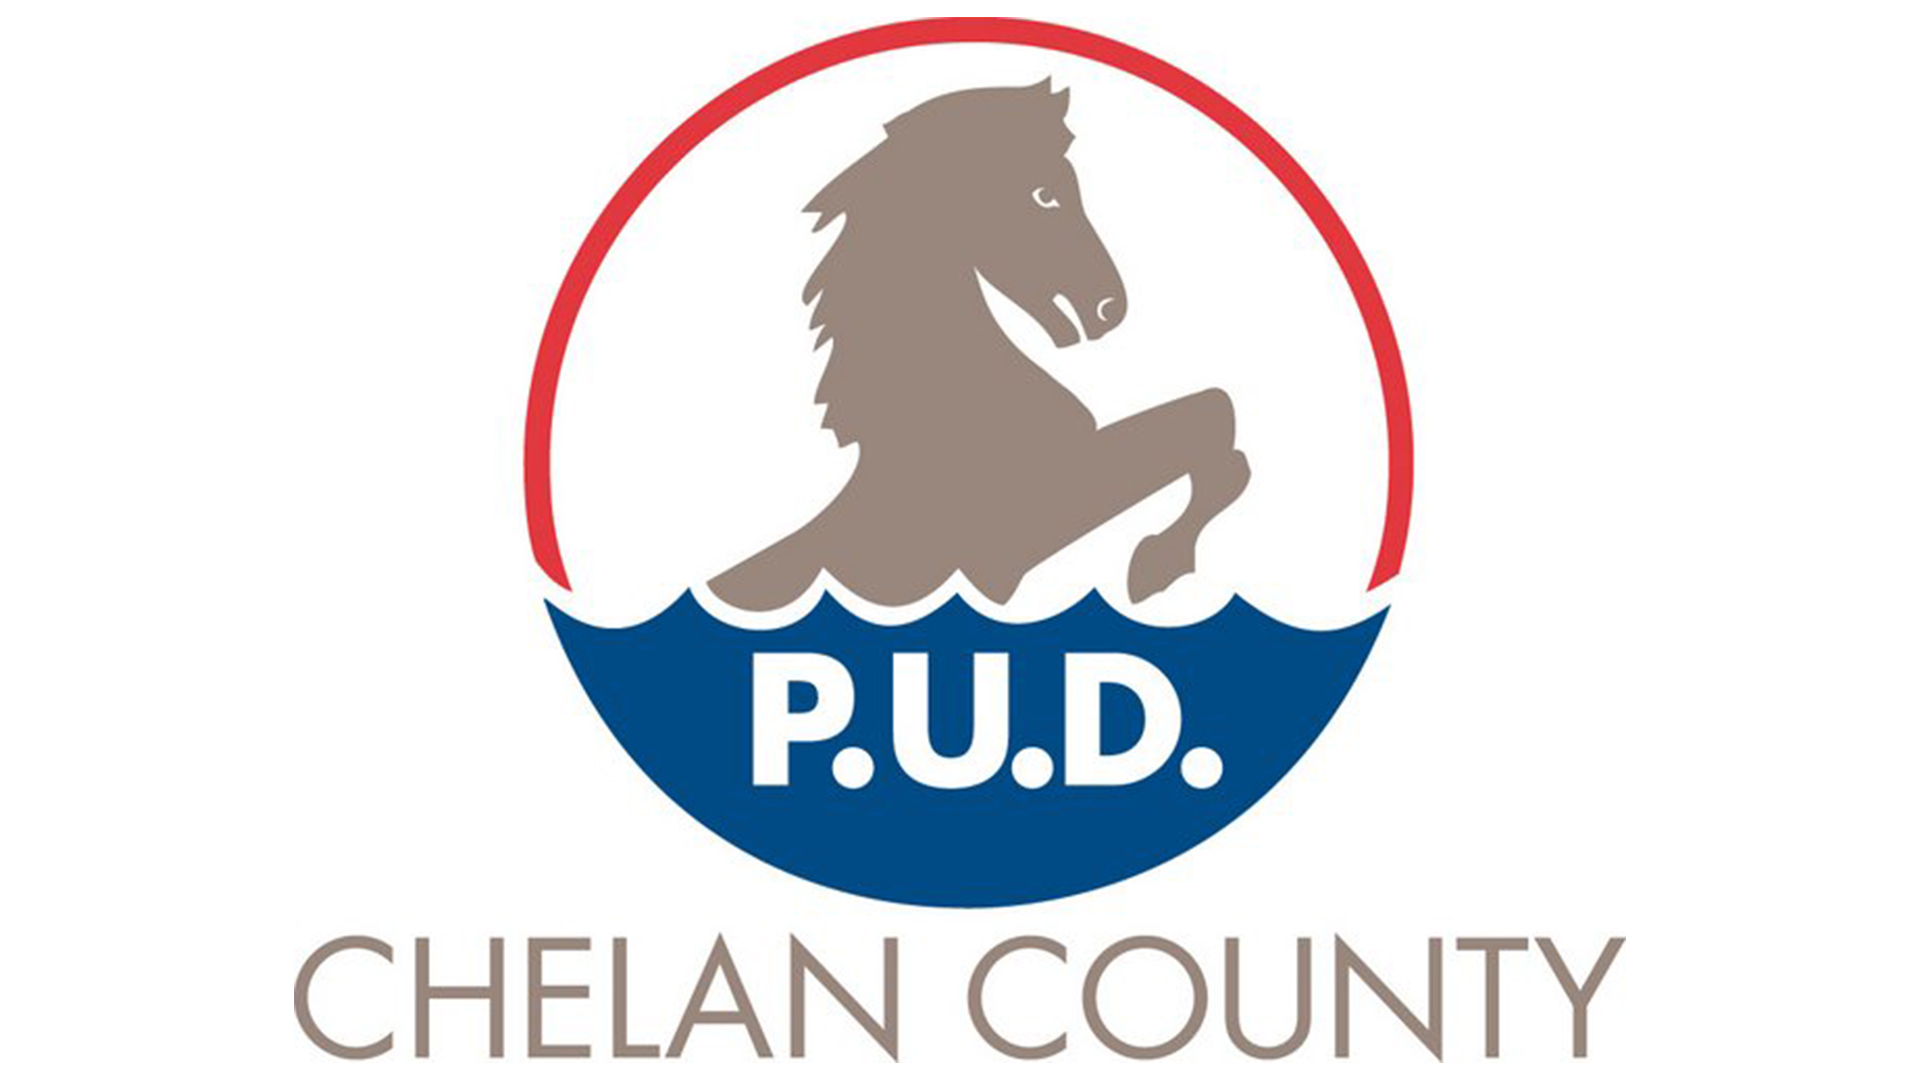 Chelan County Pud Budget For Next Year Does Not Envision Any